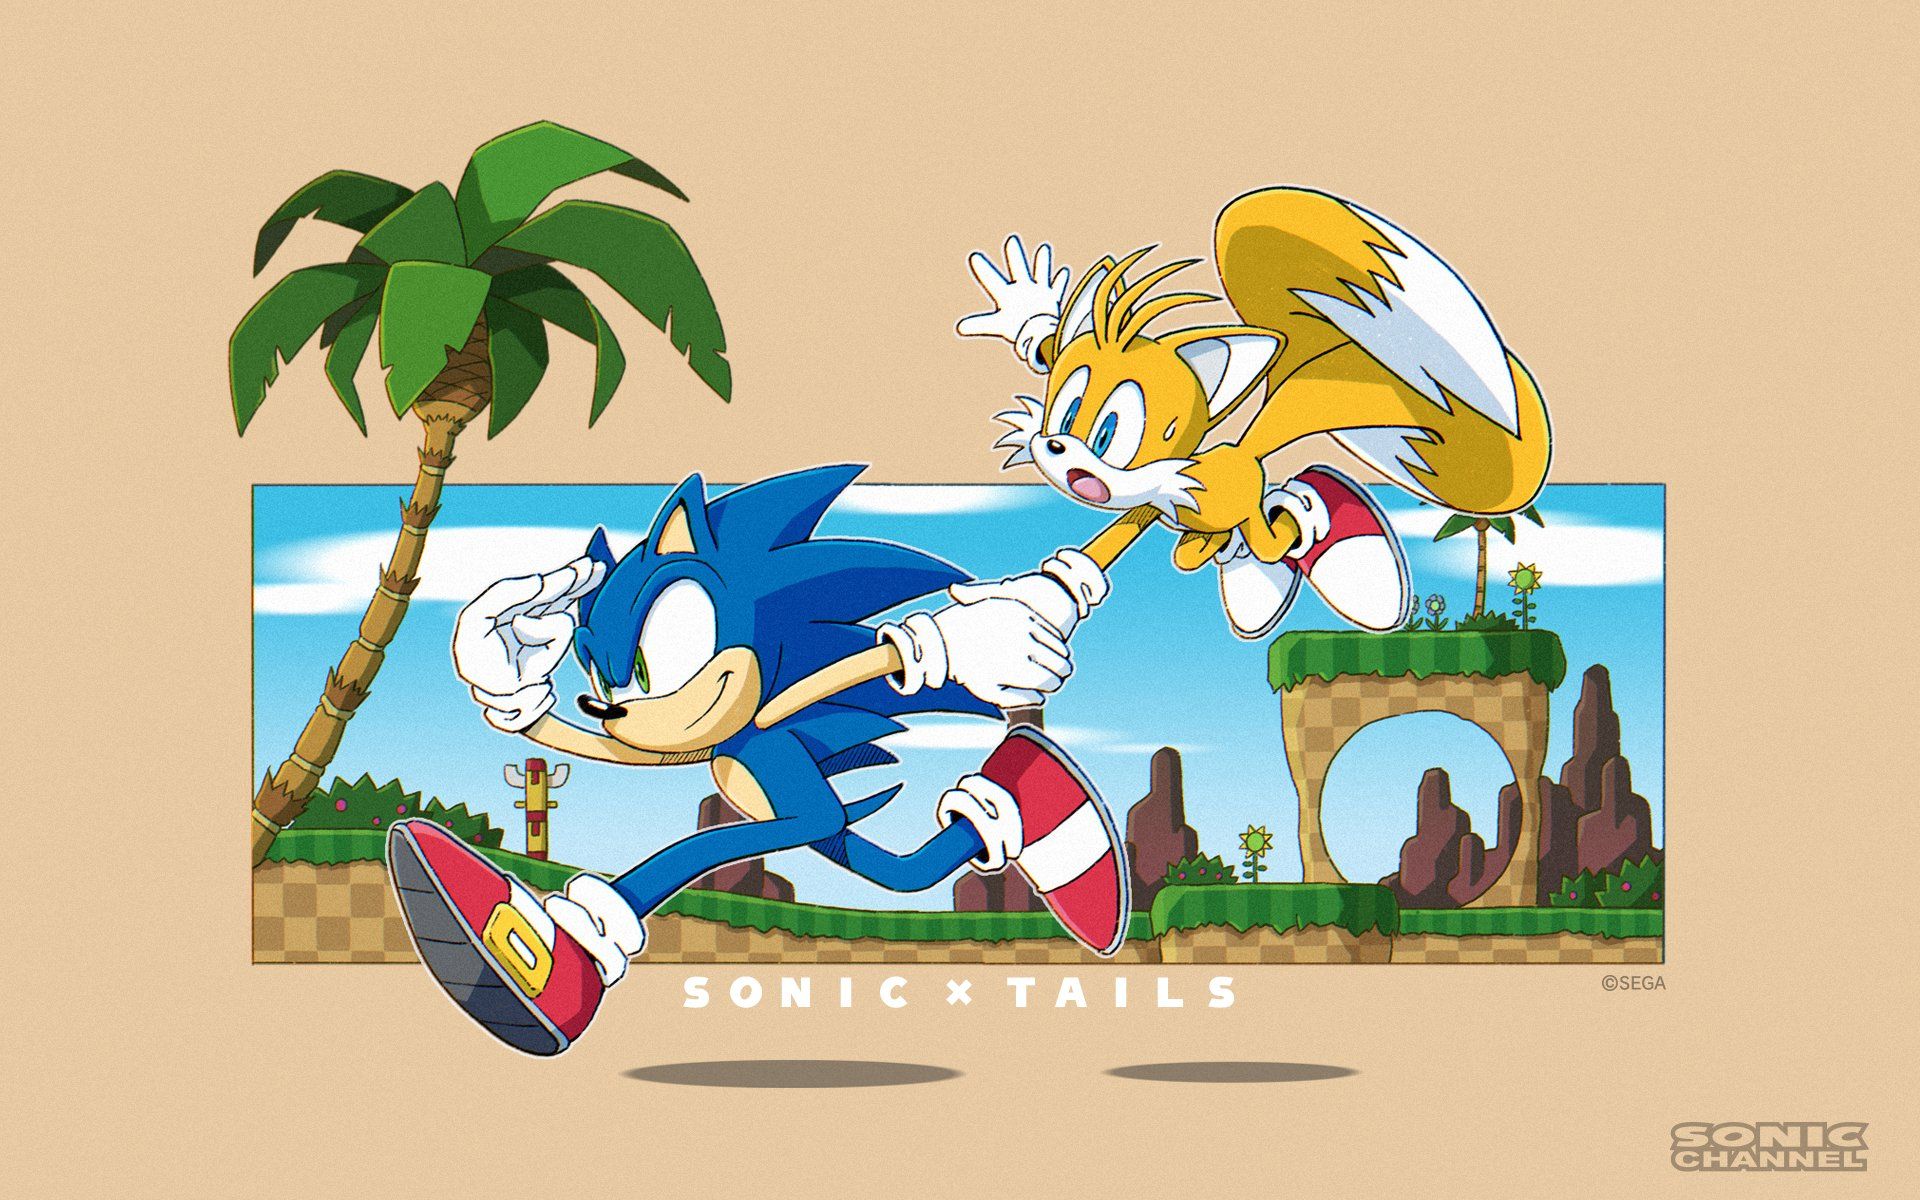 Sonic And All Characters New #Sonic Channel Official Wallpaper And Calendar With All New Design Are Already Available! On Top Of That, From Now On The SC Team Will Be